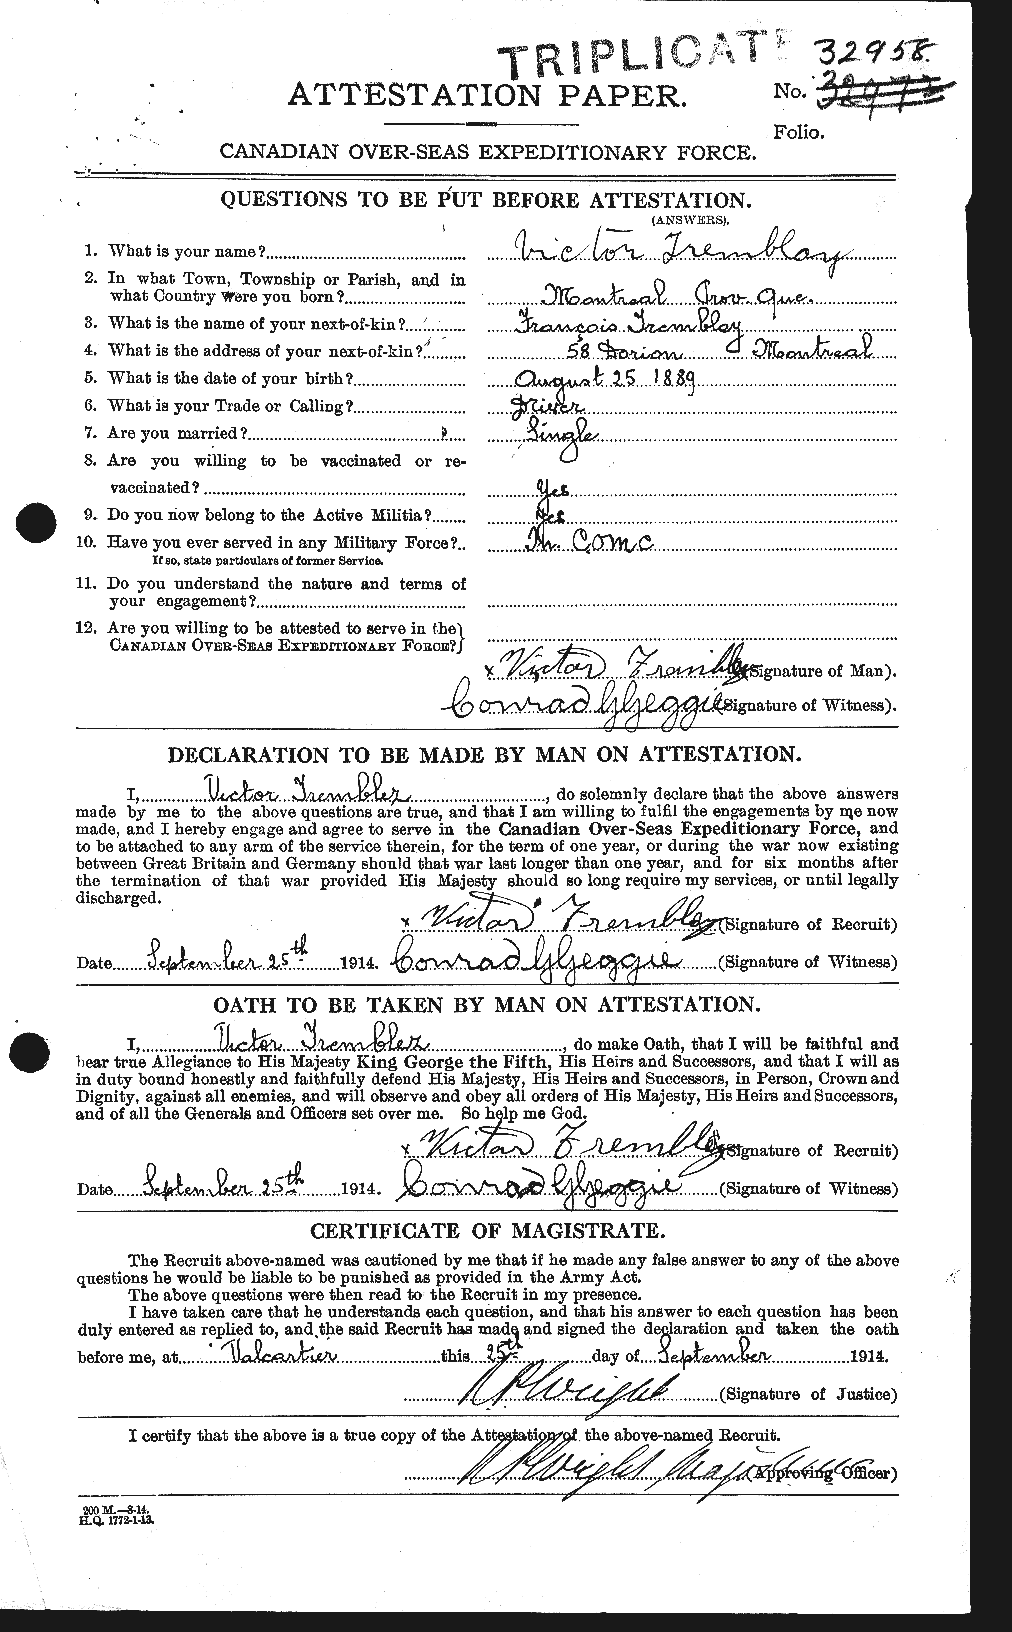 Personnel Records of the First World War - CEF 638331a